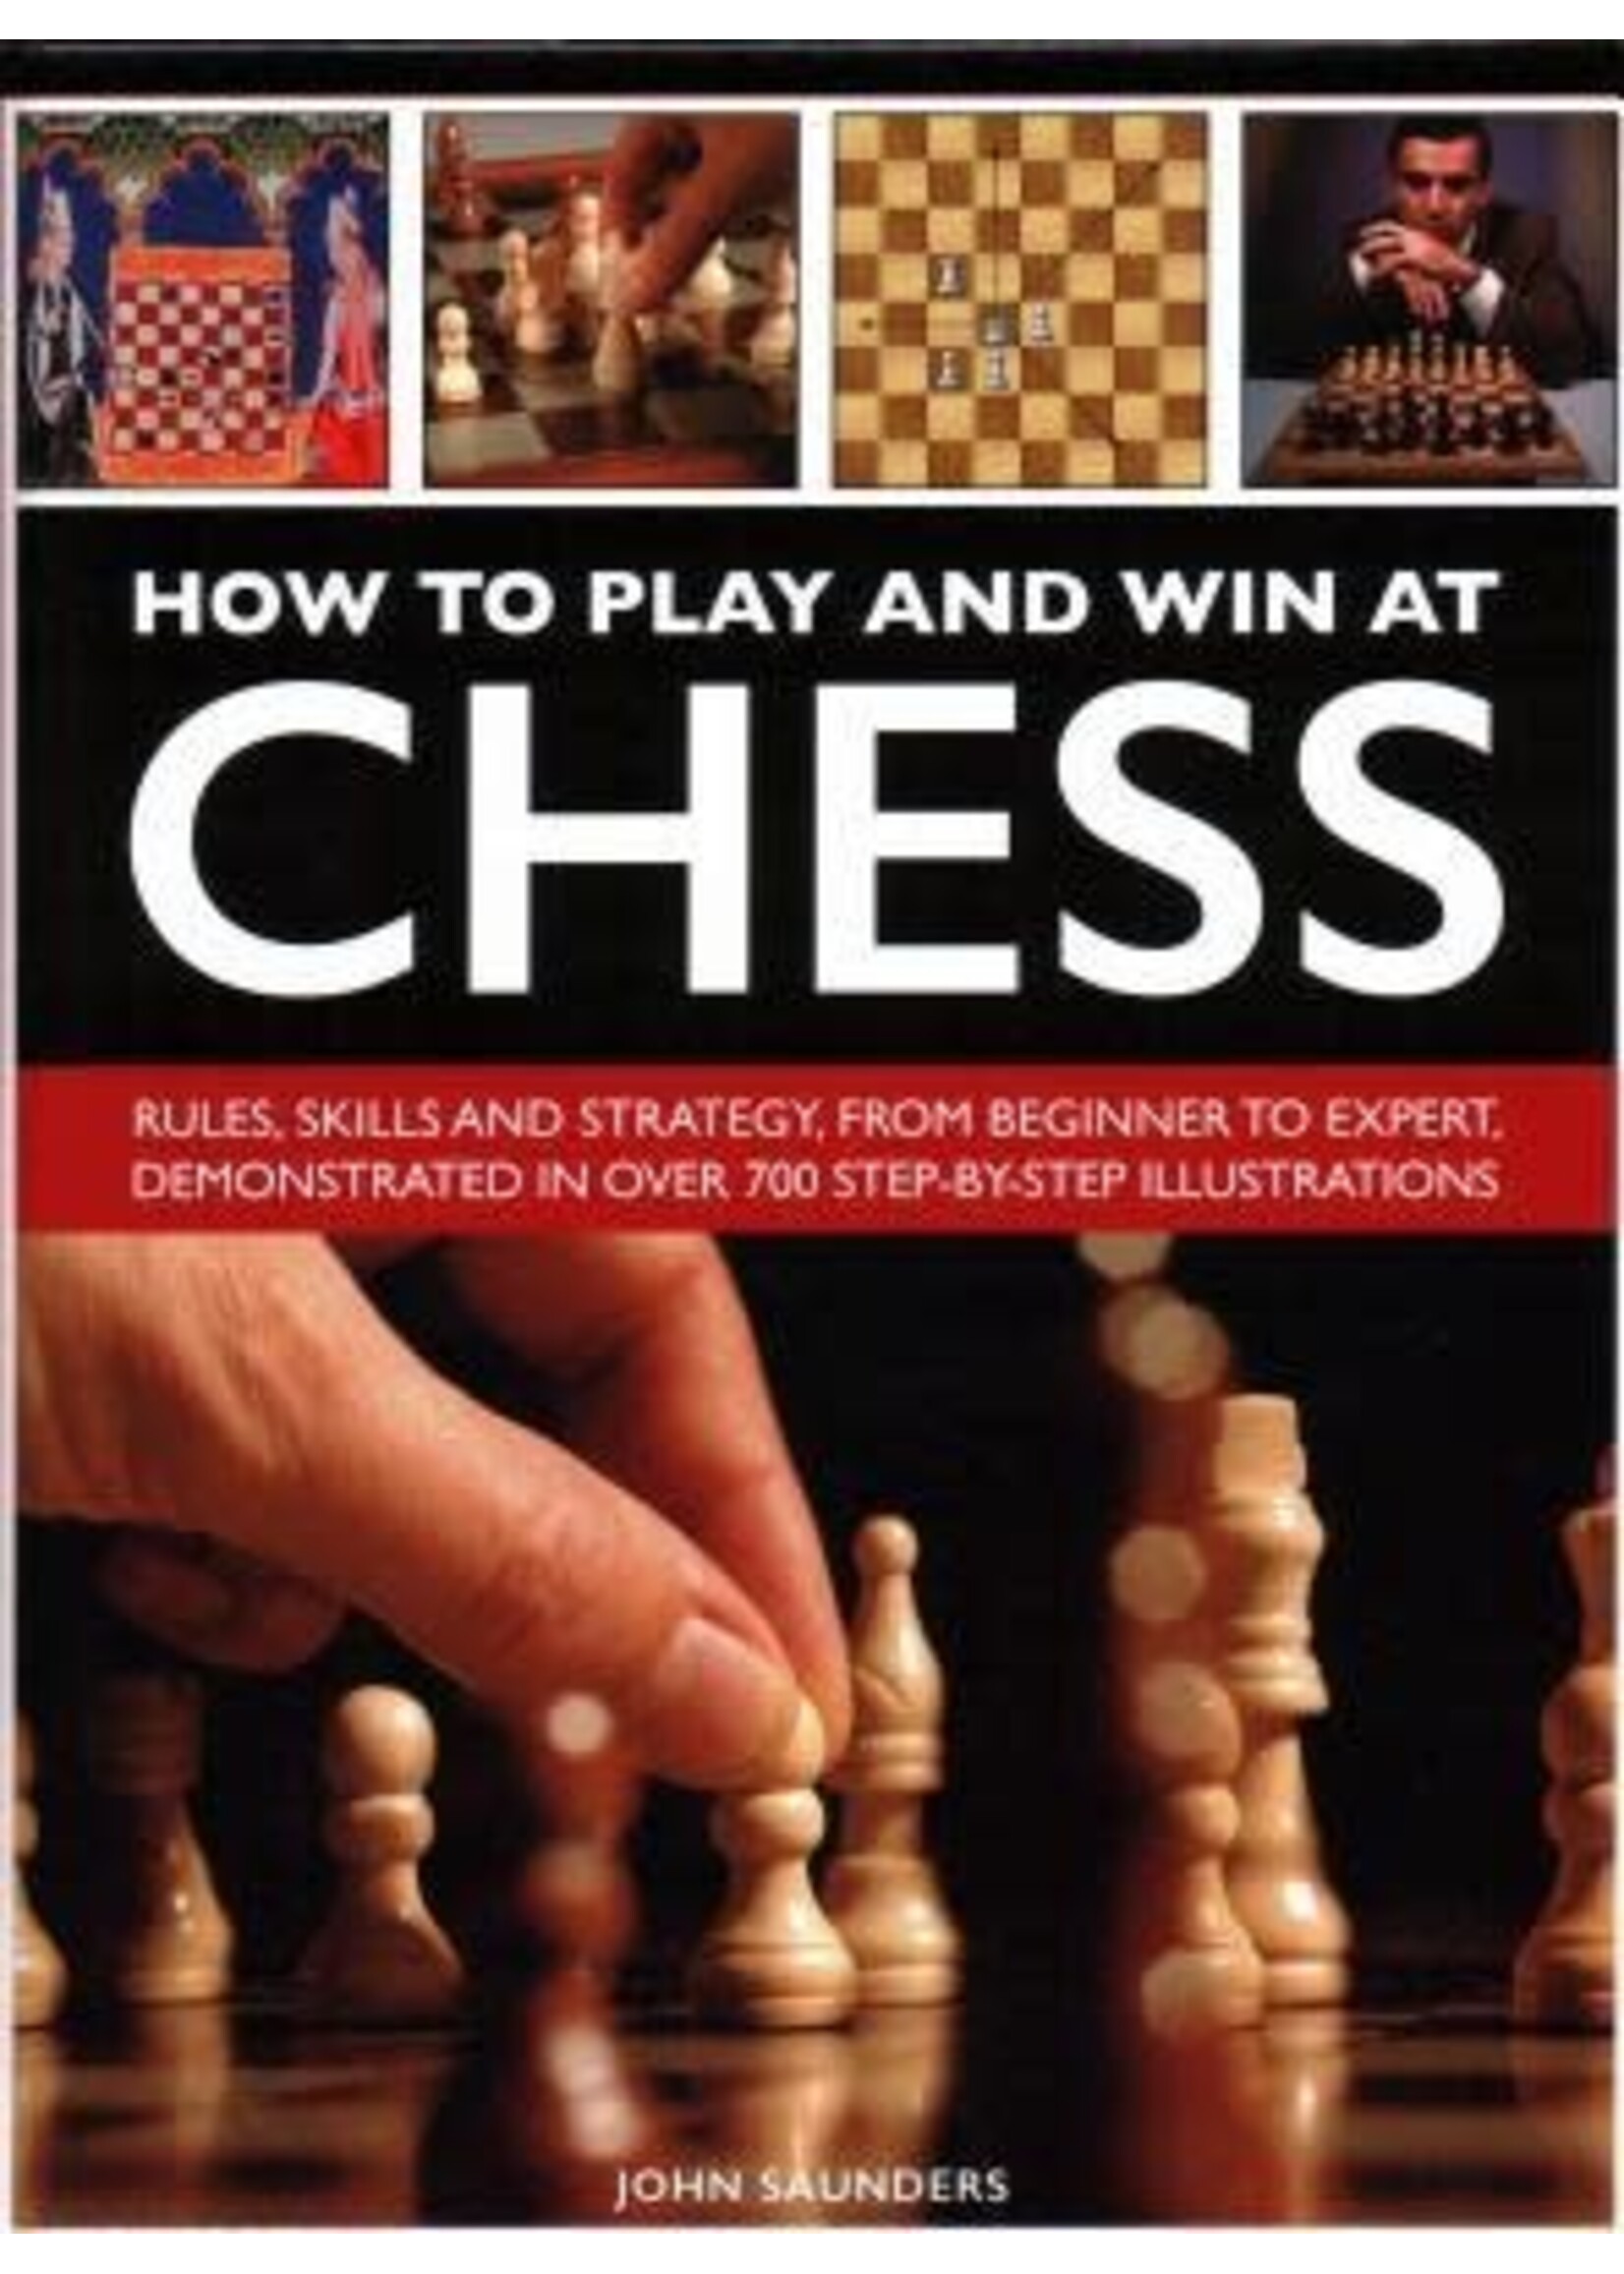 How to Play and Win at Chess: History, Rules, Skills and Tactics by John Saunders